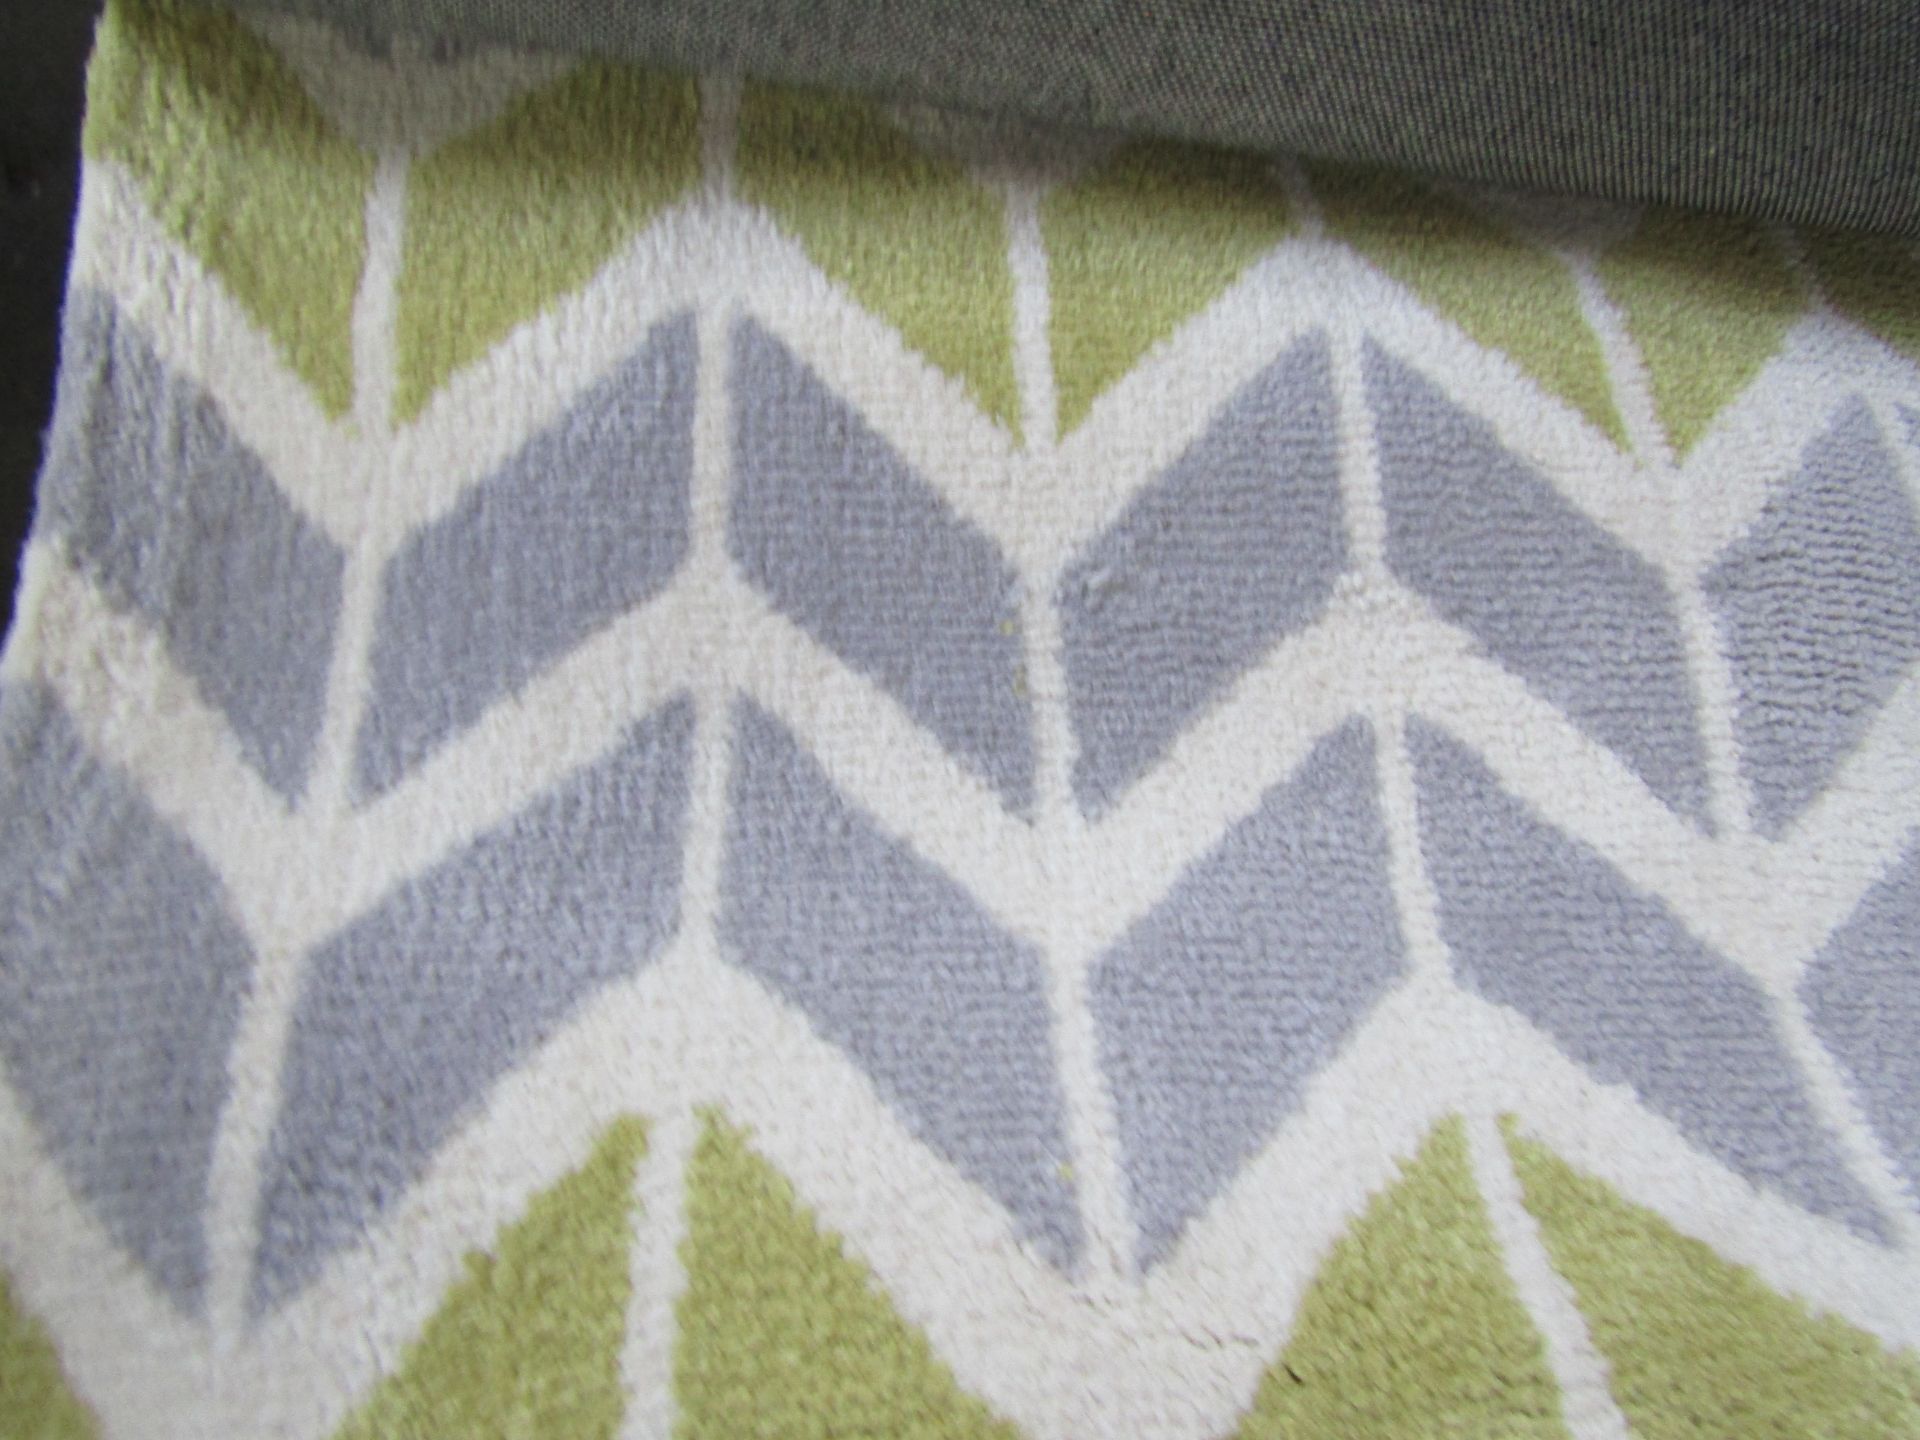 Rugstore Arlo Rug L100 X W150Cm Chevron Lemon & Grey RRP 125About the Product(s)Whether you are